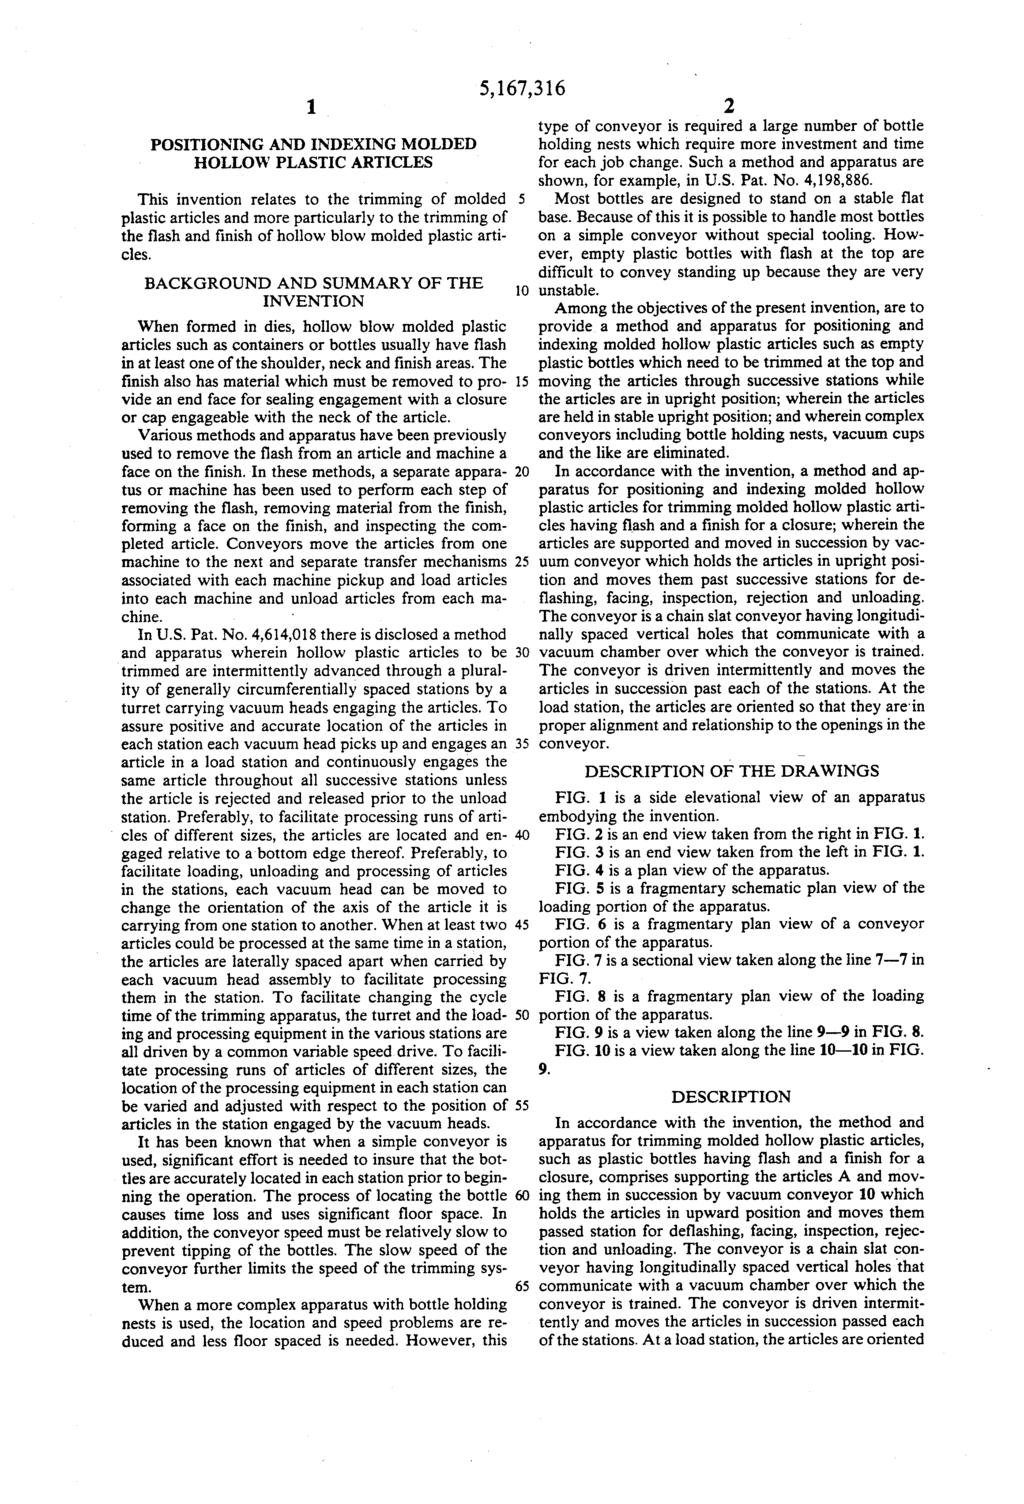 1. POSITONING AND INDEXING MOLDED HOLLOW PLASTIC ARTICLES This invention relates to the trimming of molded plastic articles and more particularly to the trimming of the flash and finish of hollow